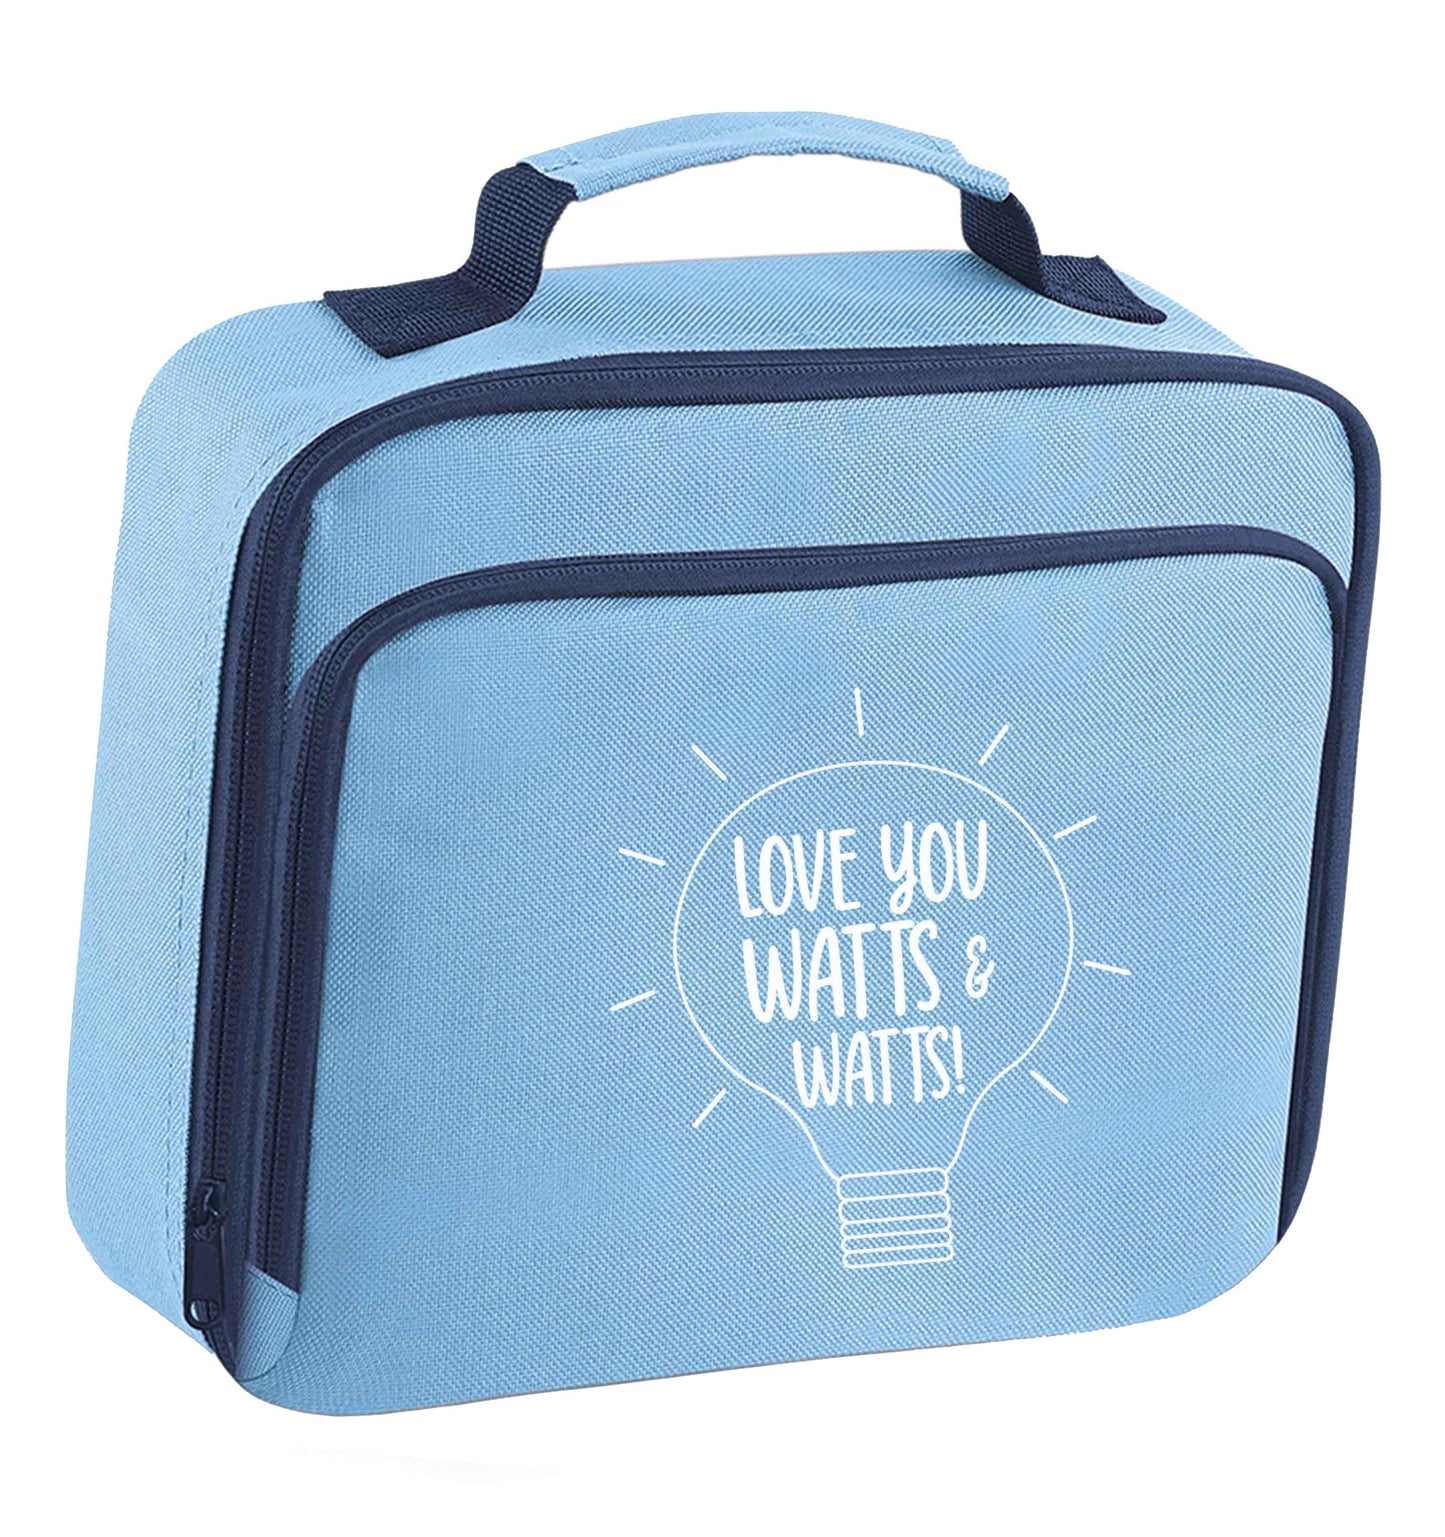 I love you watts and watts insulated blue lunch bag cooler